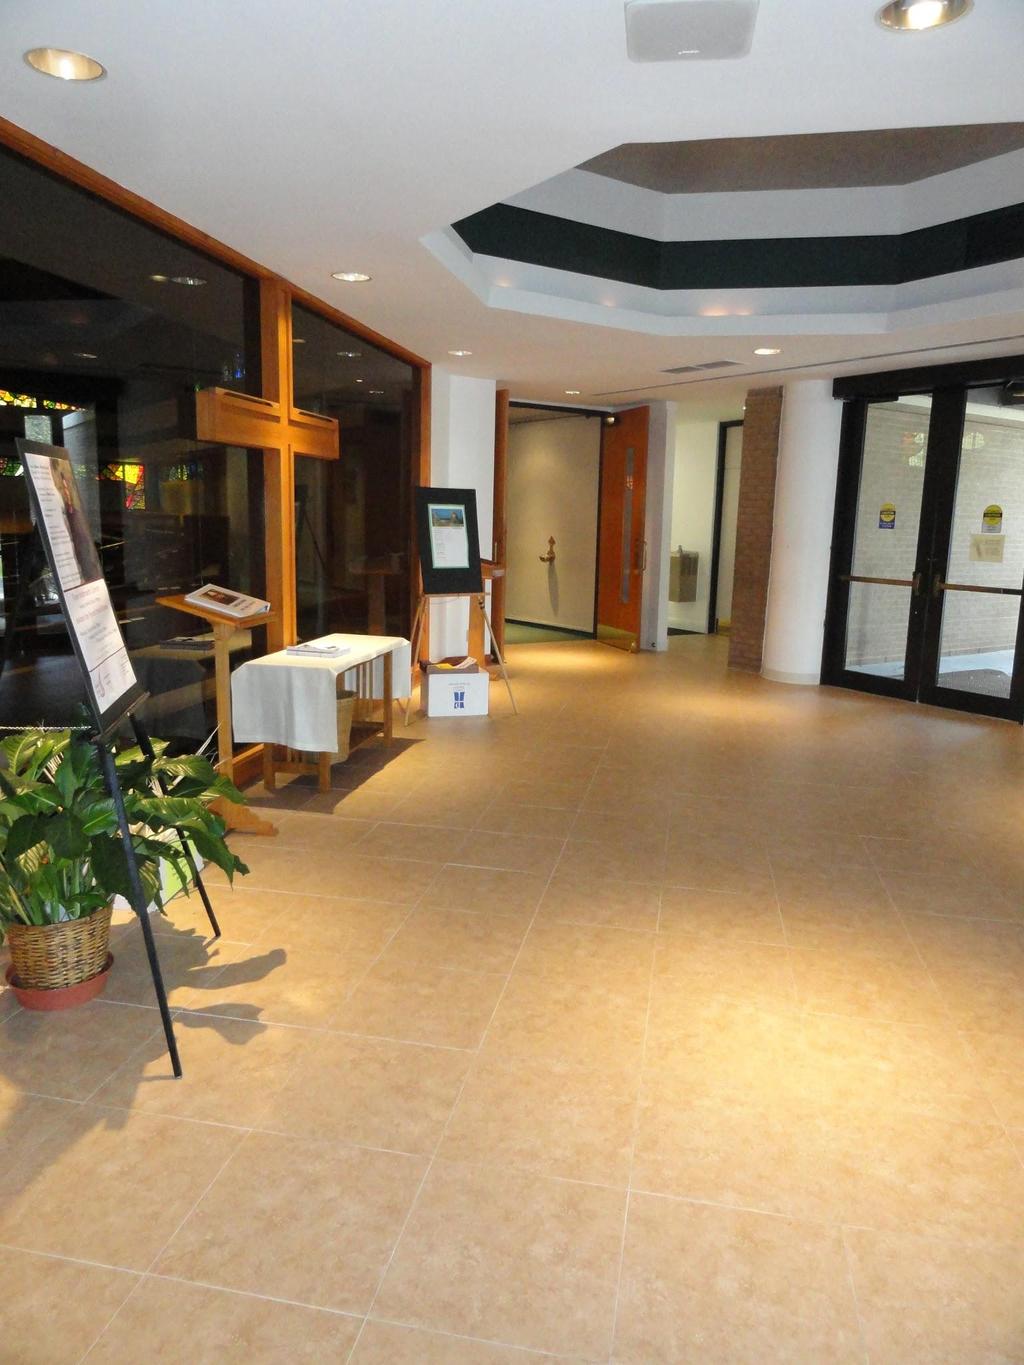 Narthex --entrance or lobby area, located at the